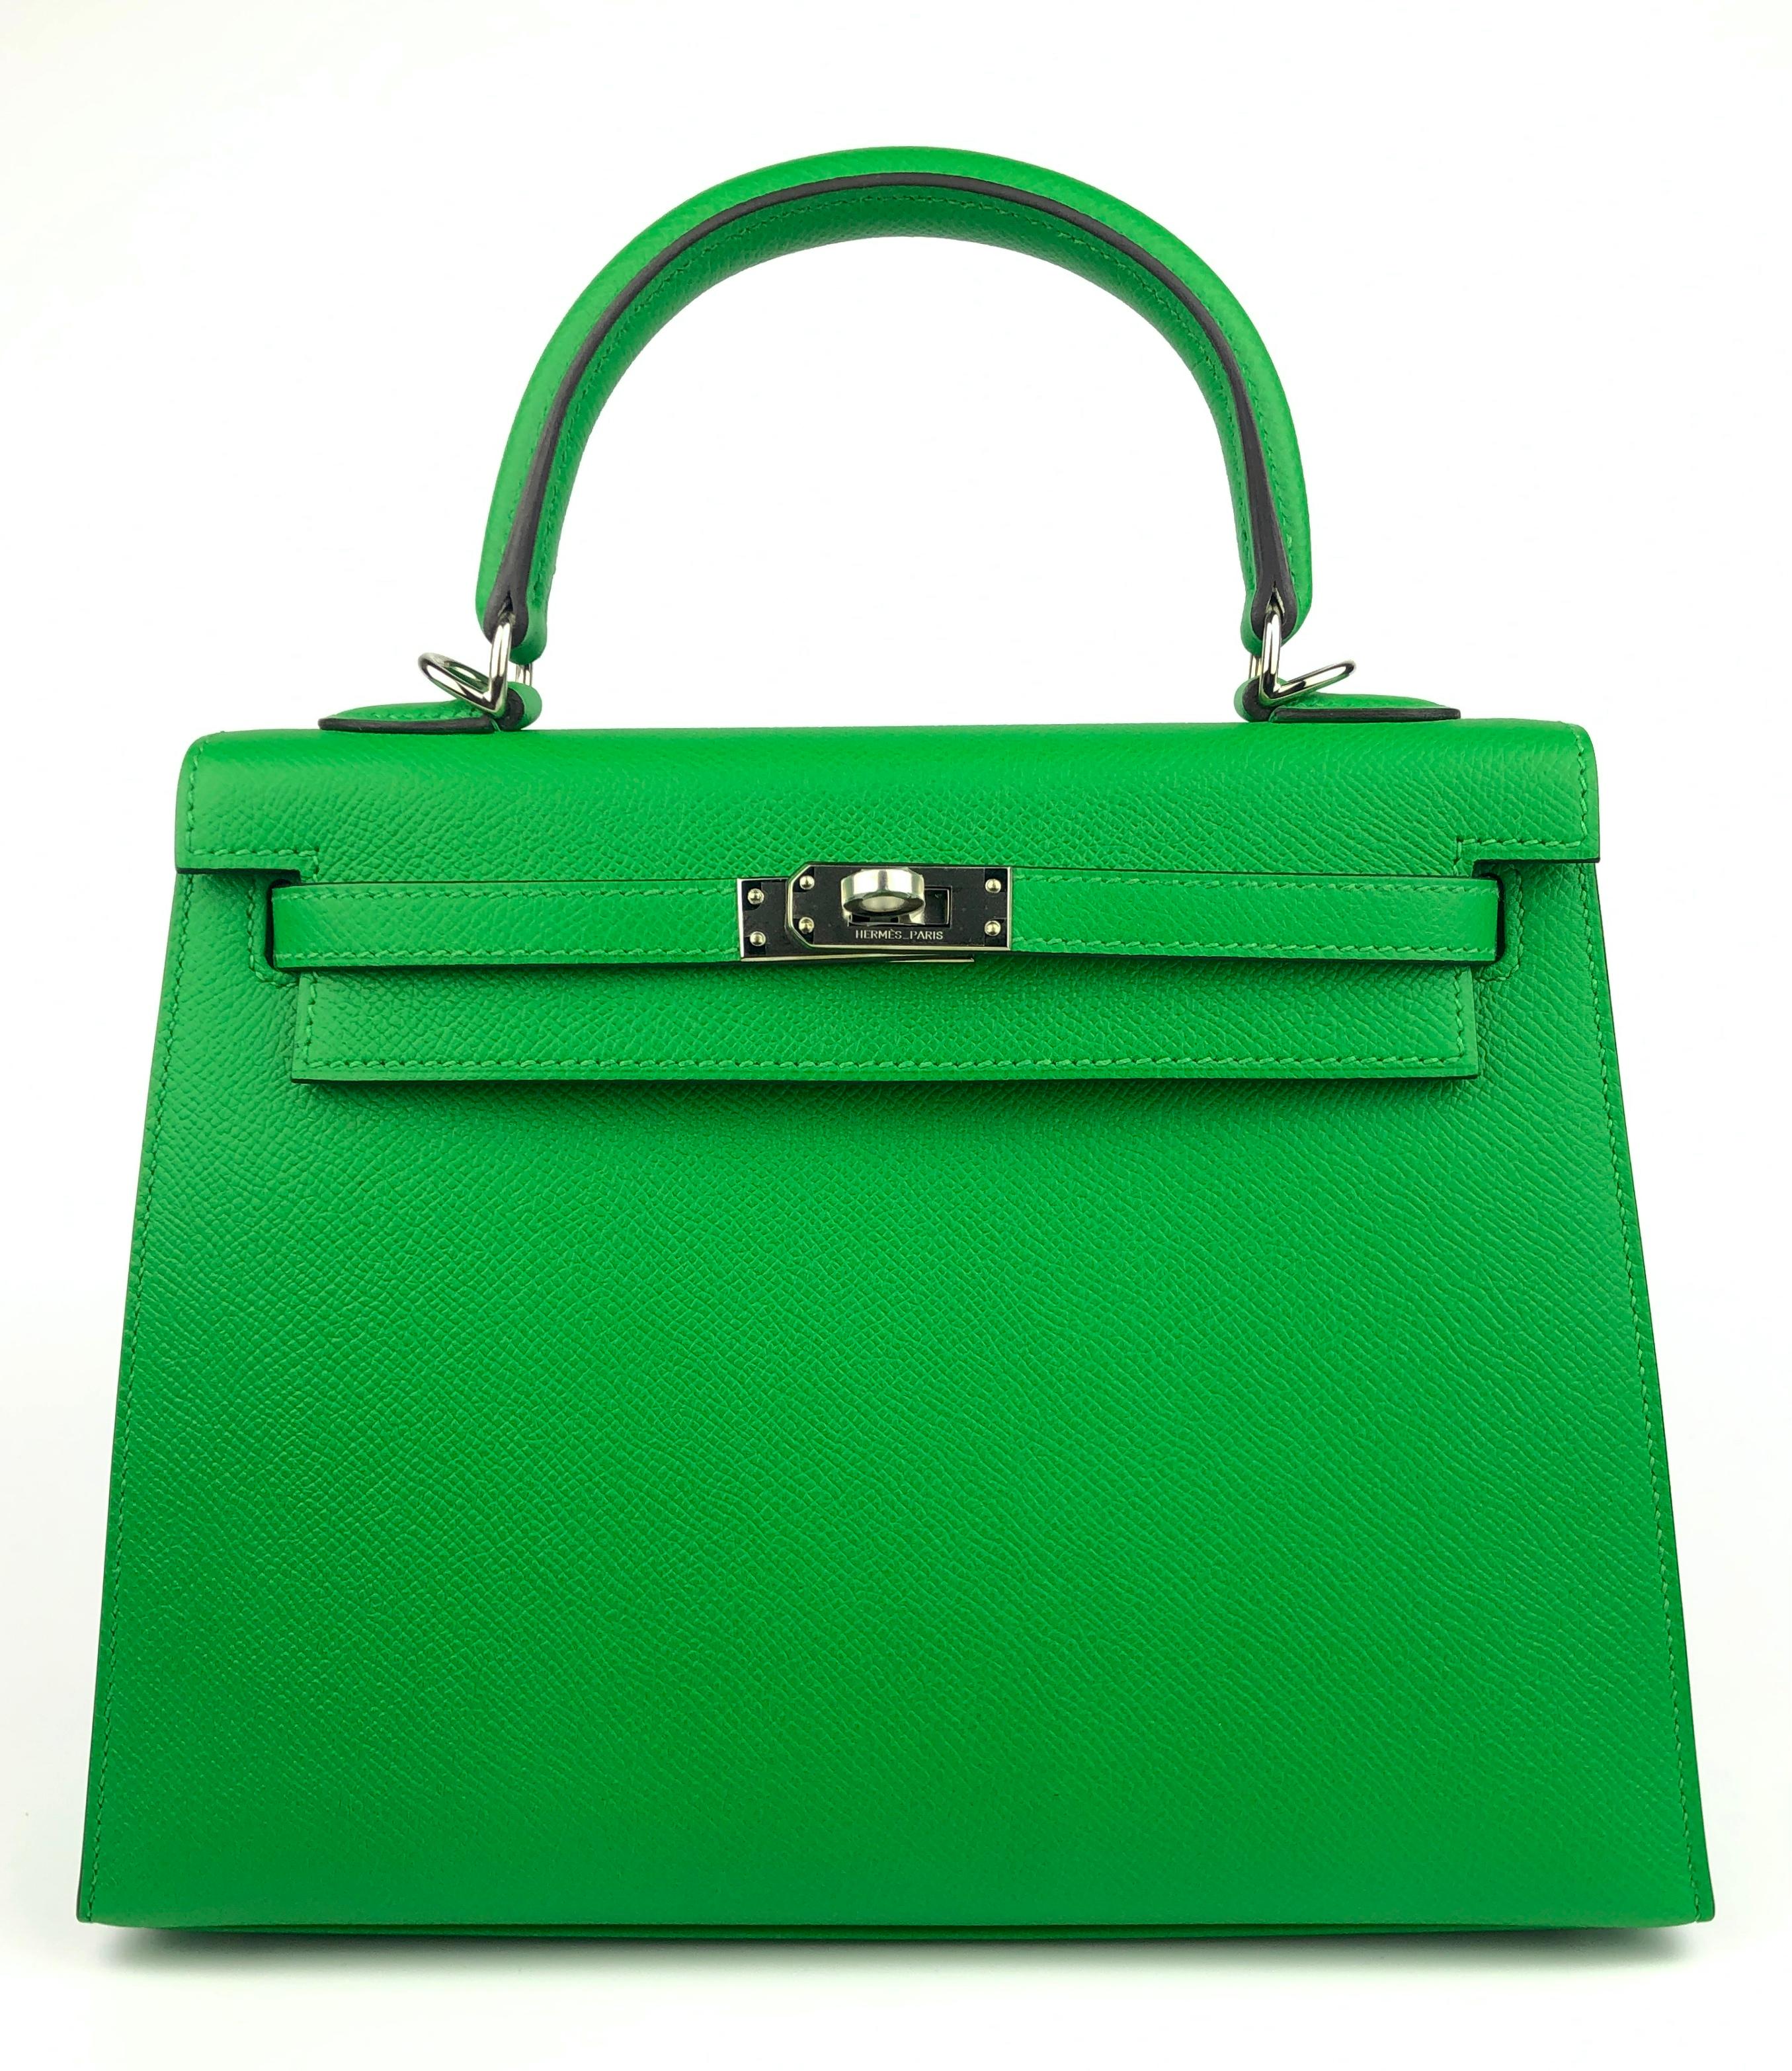 Stunning Rare As New Hermes Kelly 25 Sellier Bamboo Green Epsom Leather Complimented by Palladium Hardware. ONLY ONE FOR SALE ON 1stDibs. Plastic on all hardware and feet!

Shop with Confidence from Lux Addicts. Authenticity Guaranteed! 